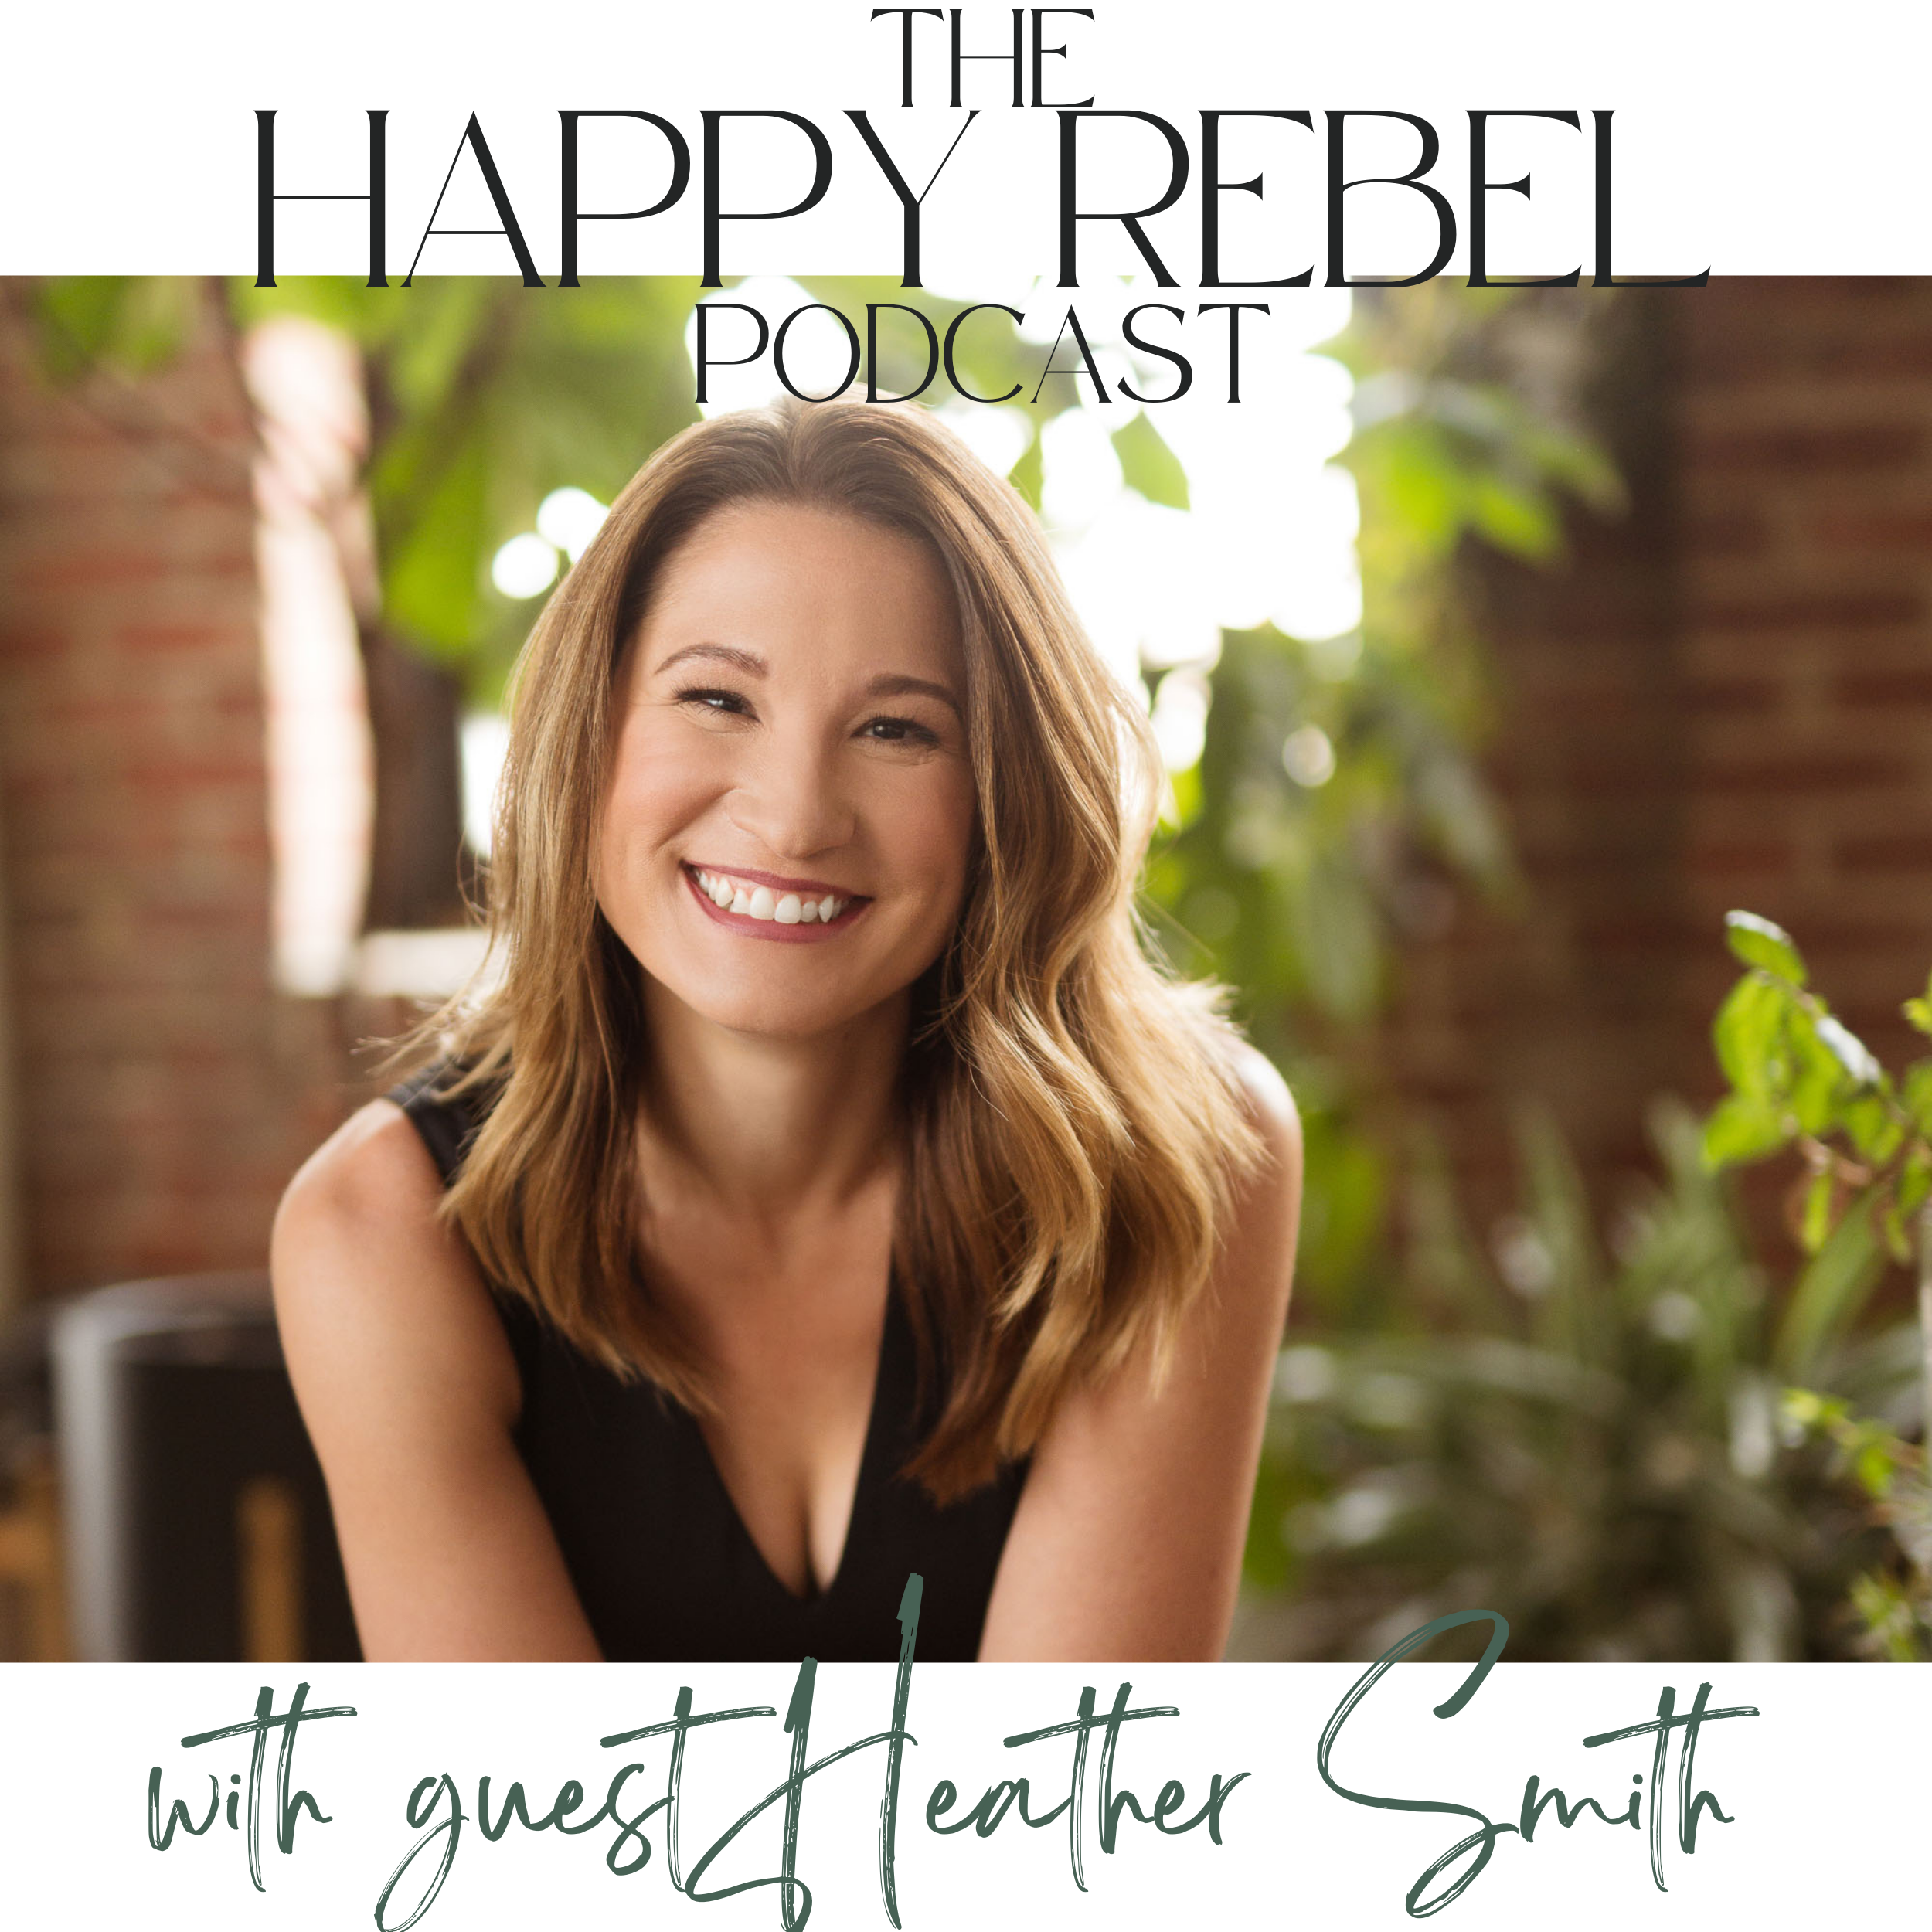 Episode 2: Heather Smith has done the work and is here to share it.